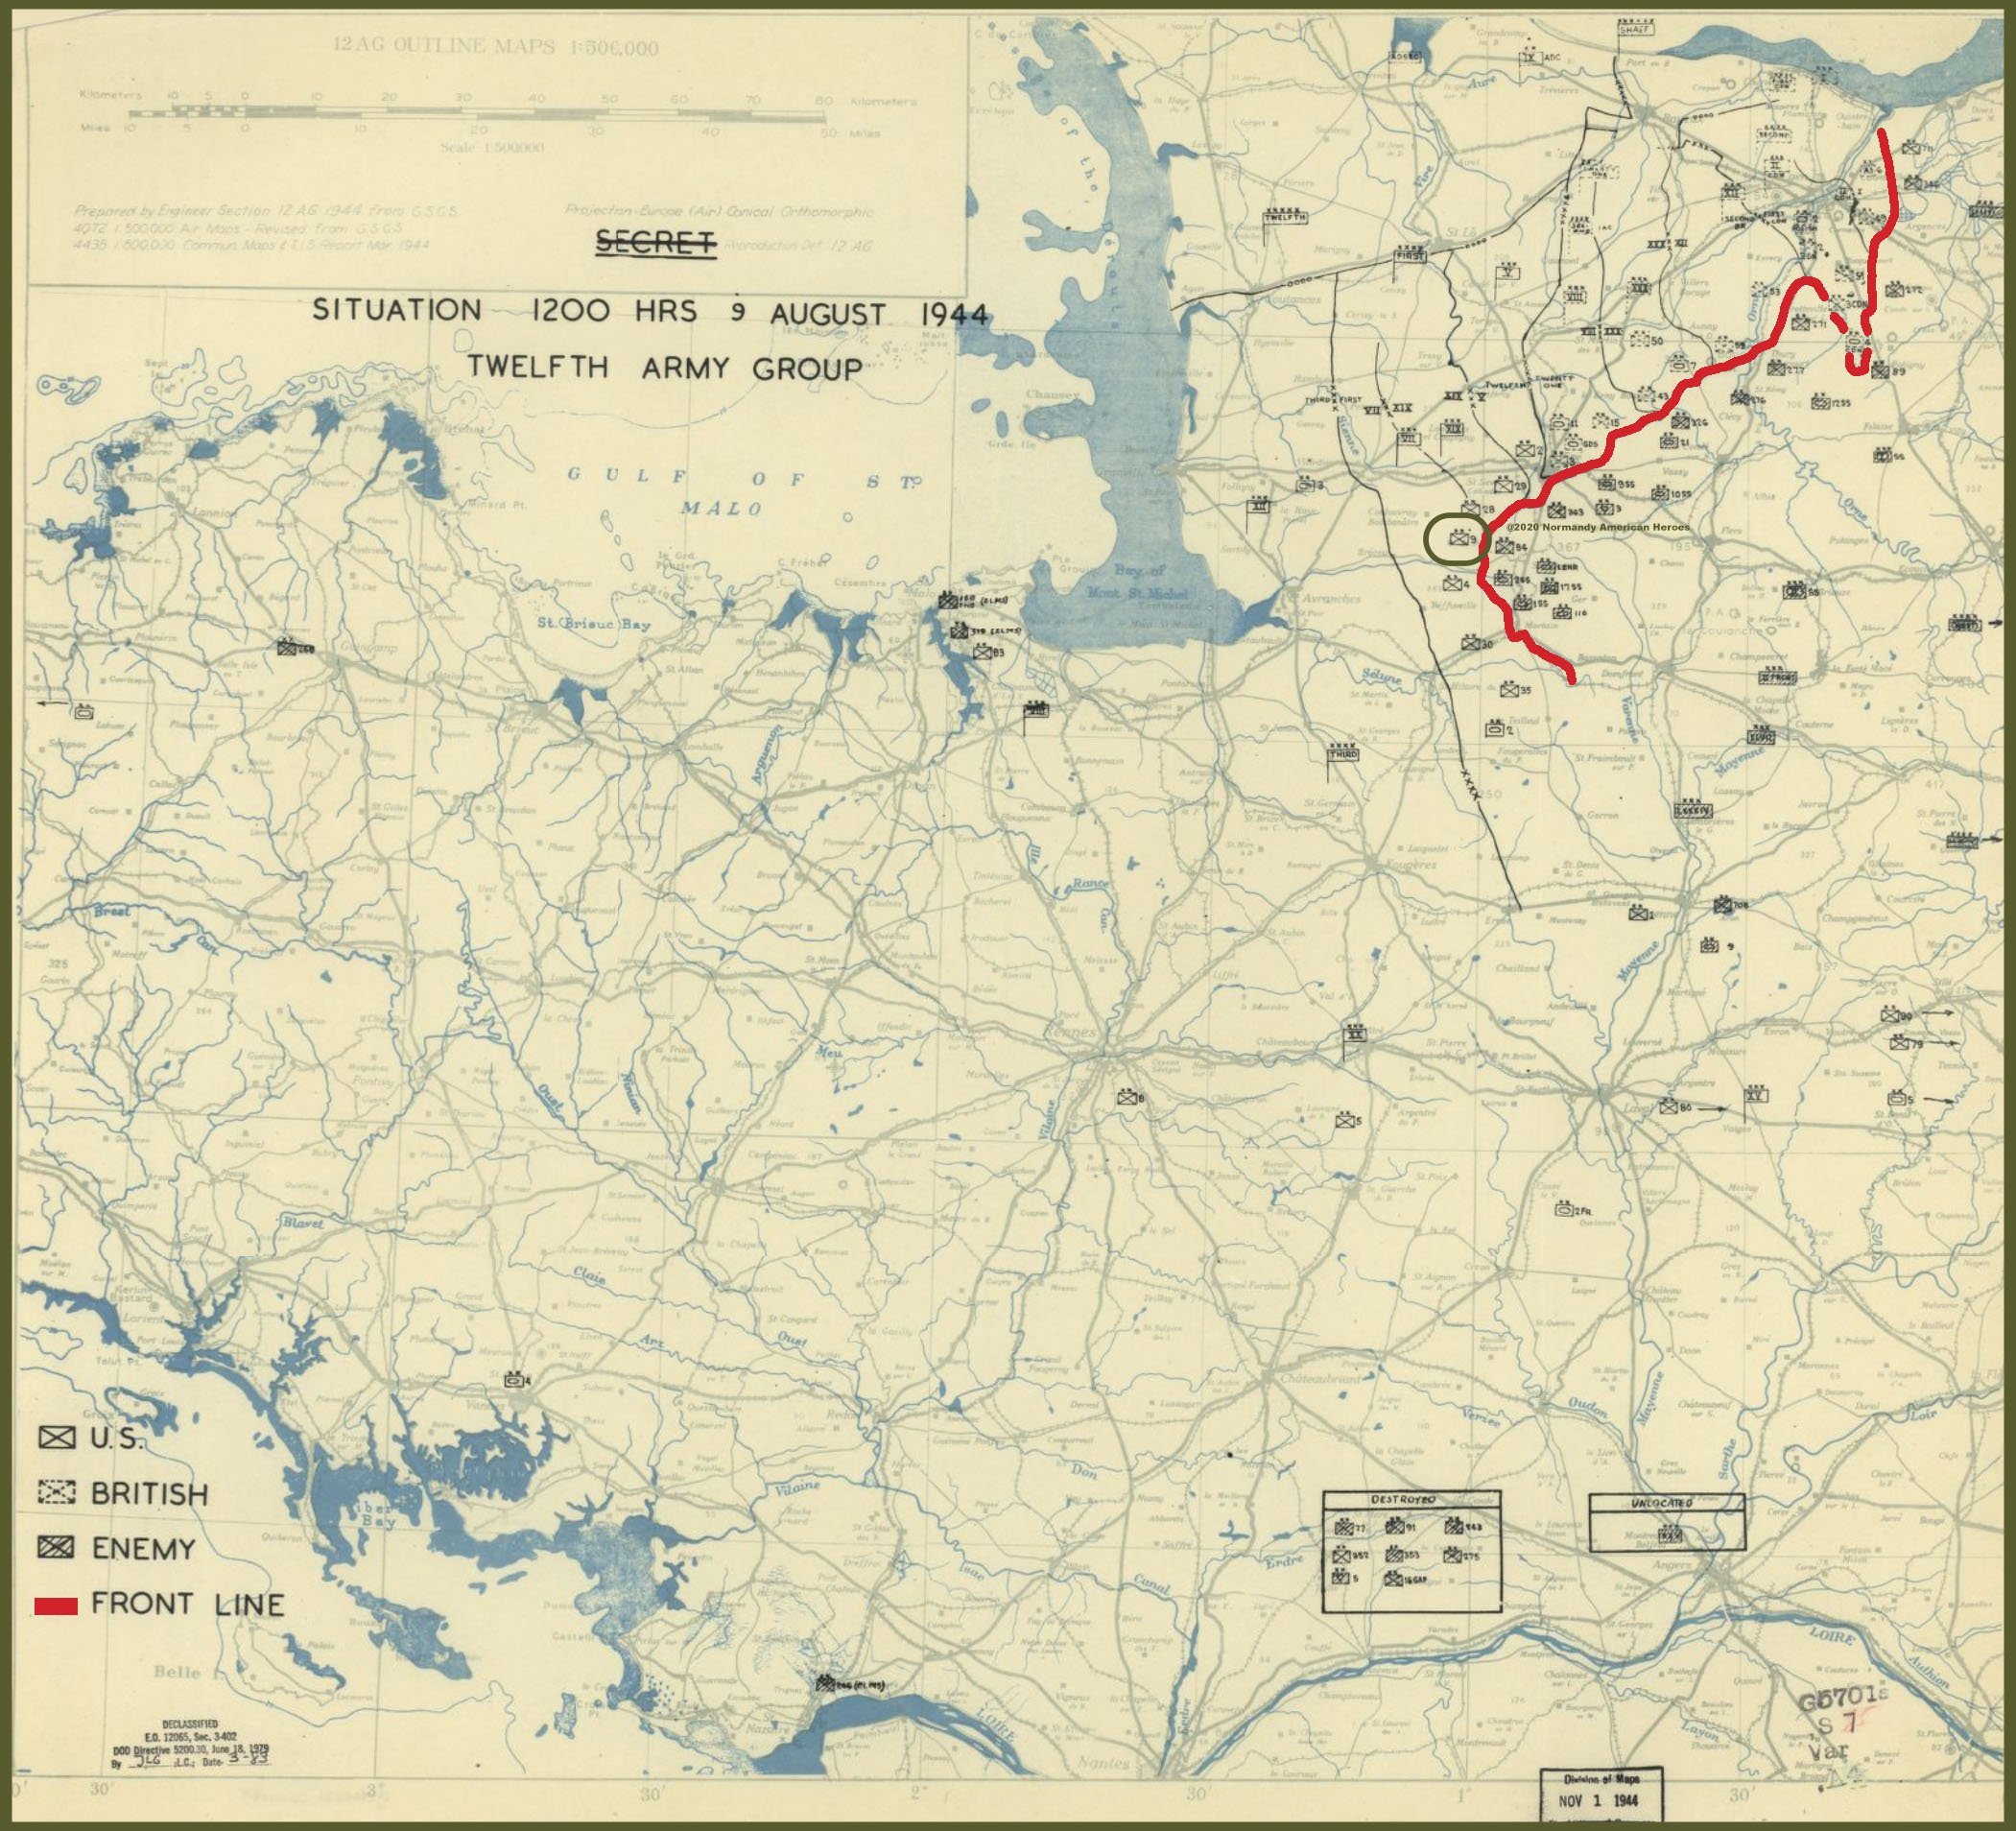 HQ Twelfth Army Group situation map 9 August 1944